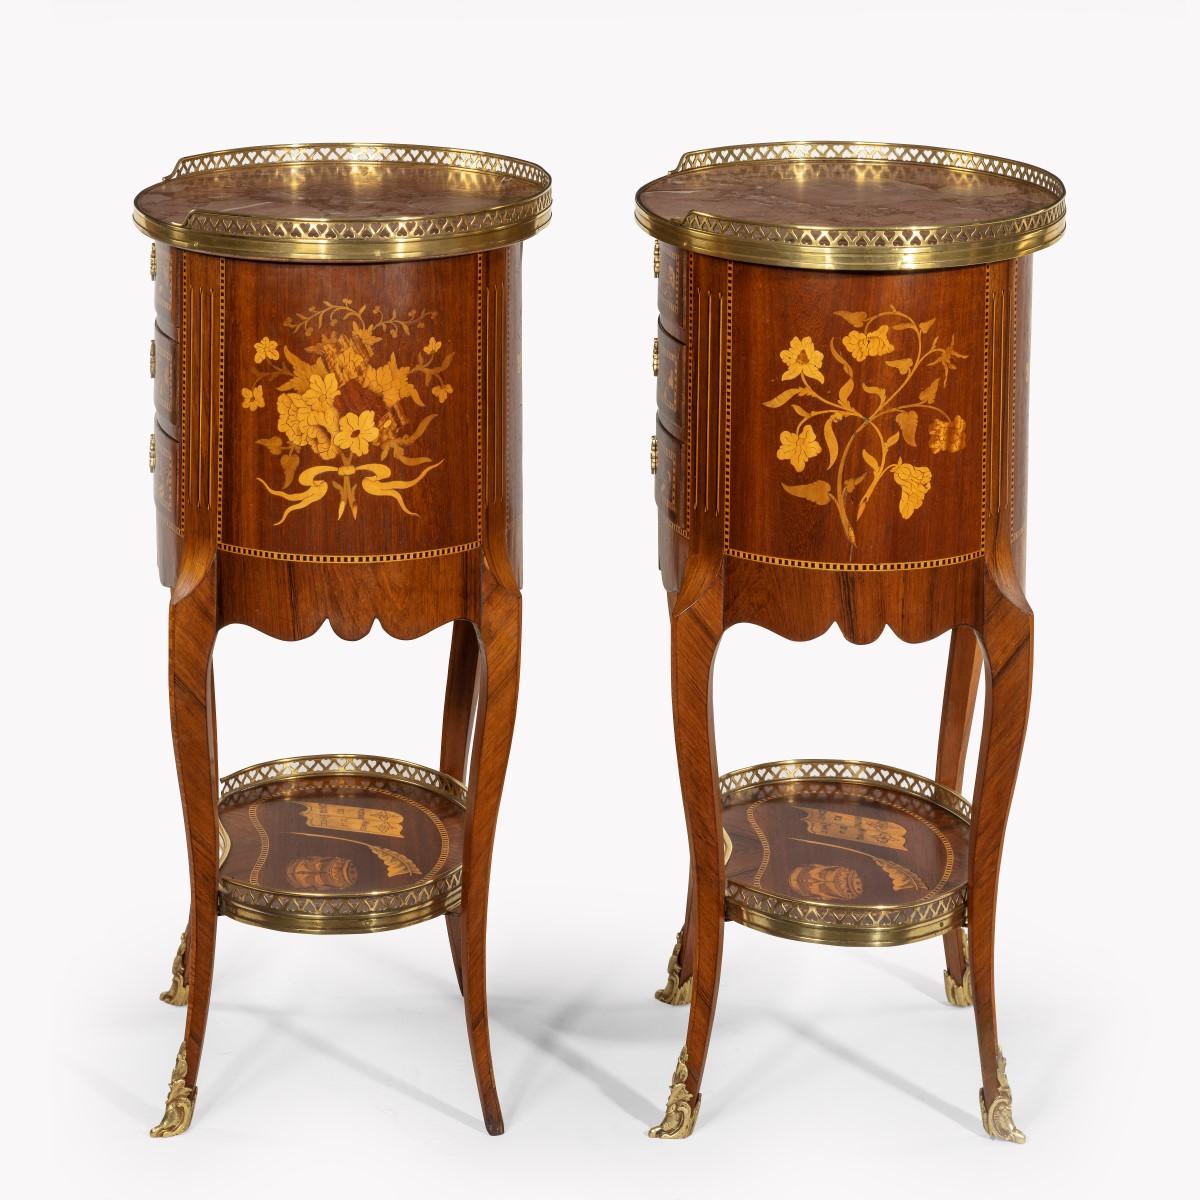 Pair of French Rosewood Oval Marquetry Bedside Tables with Marble Tops In Good Condition For Sale In Lymington, Hampshire